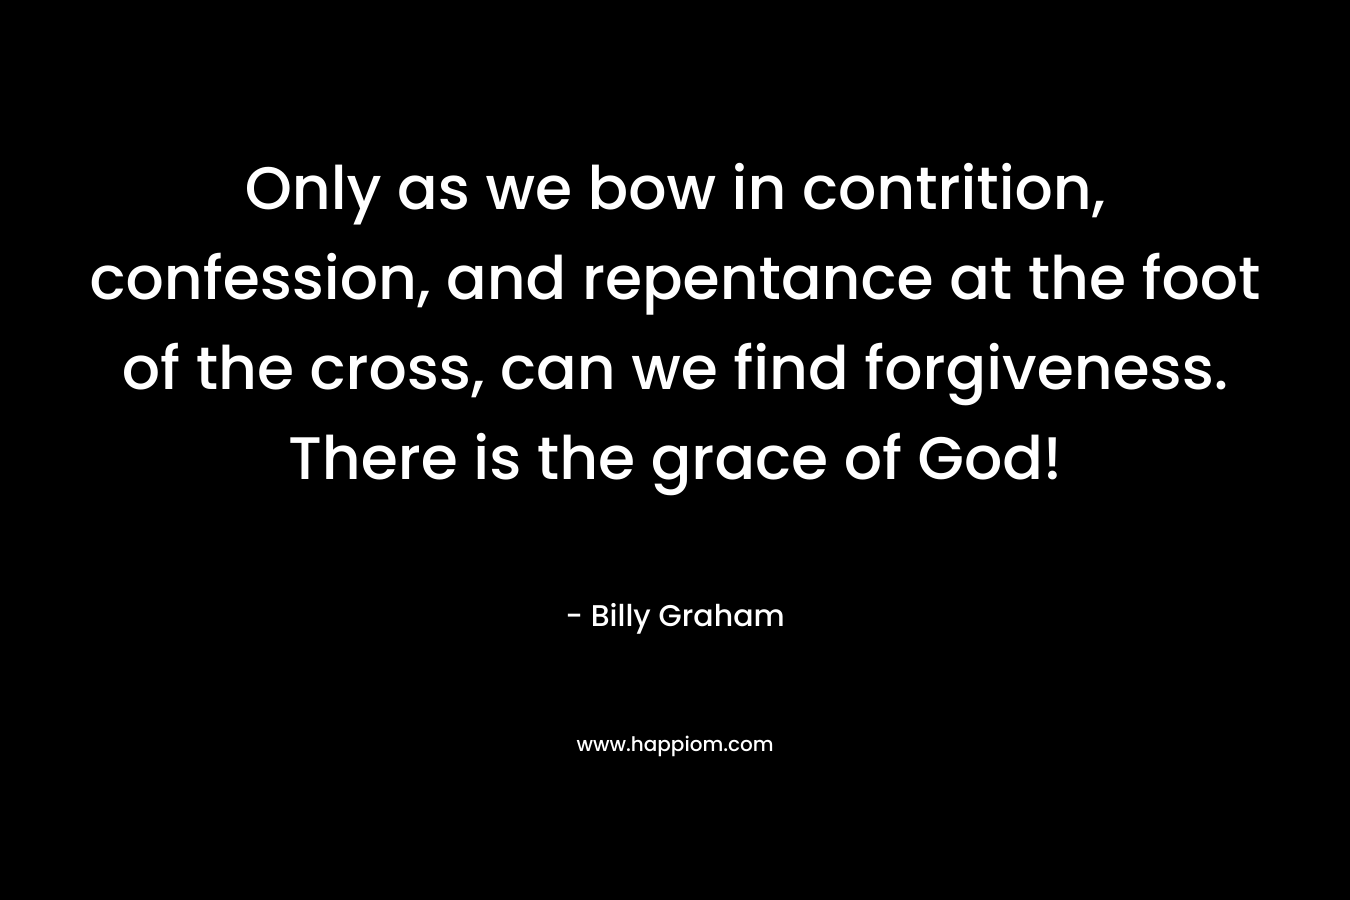 Only as we bow in contrition, confession, and repentance at the foot of the cross, can we find forgiveness. There is the grace of God! – Billy Graham